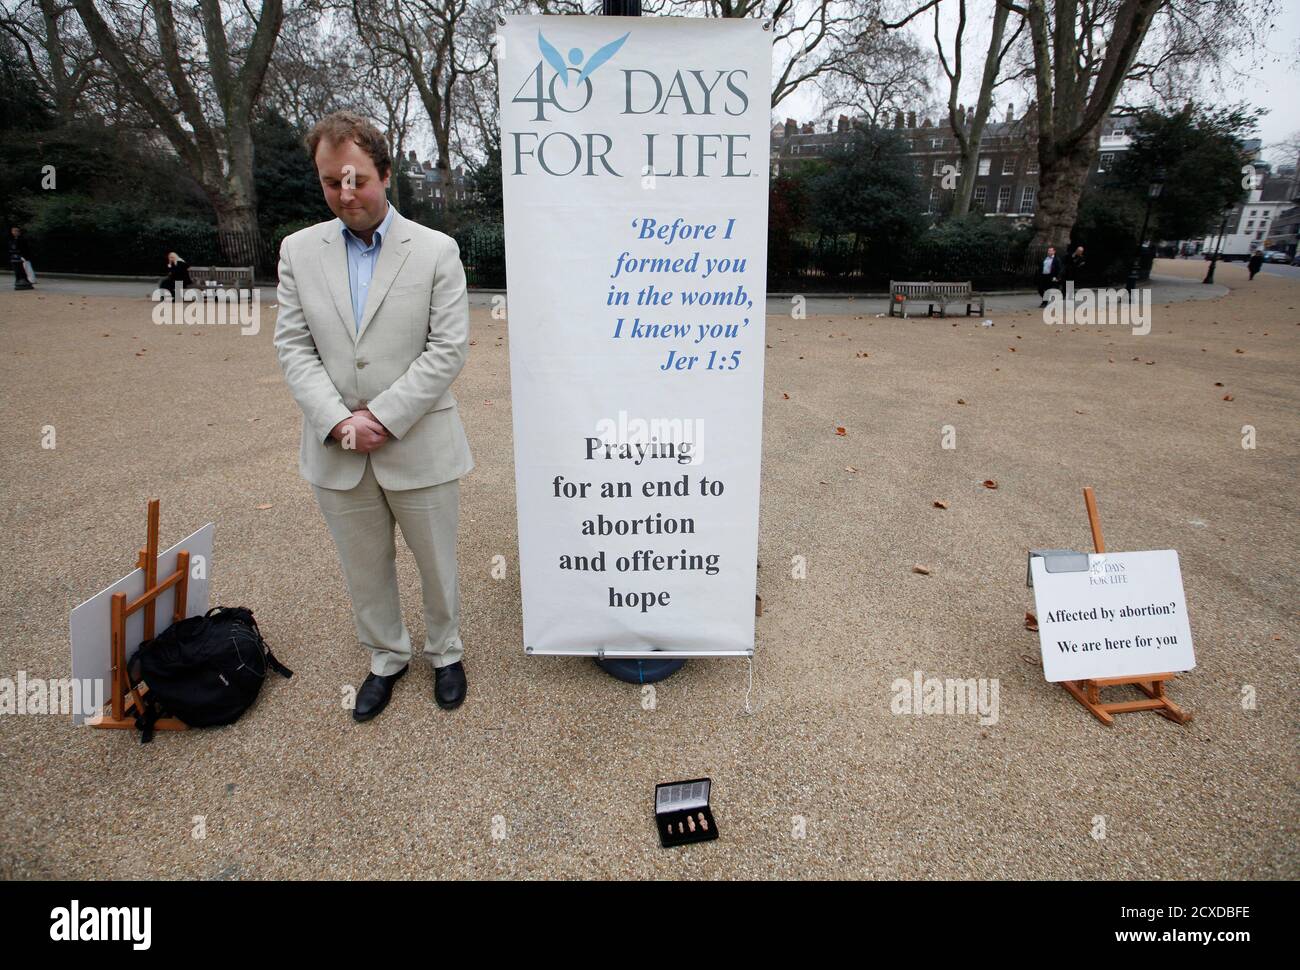 An activist stands outside a branch of the British Pregnancy Advisory Service, a clinic which offers abortions, in central London March 14, 2012. The global pro-life group 40 Days for Life hits the halfway mark on Wednesday in their latest campaign. REUTERS/Andrew Winning (BRITAIN - Tags: SOCIETY HEALTH POLITICS RELIGION) Stock Photo